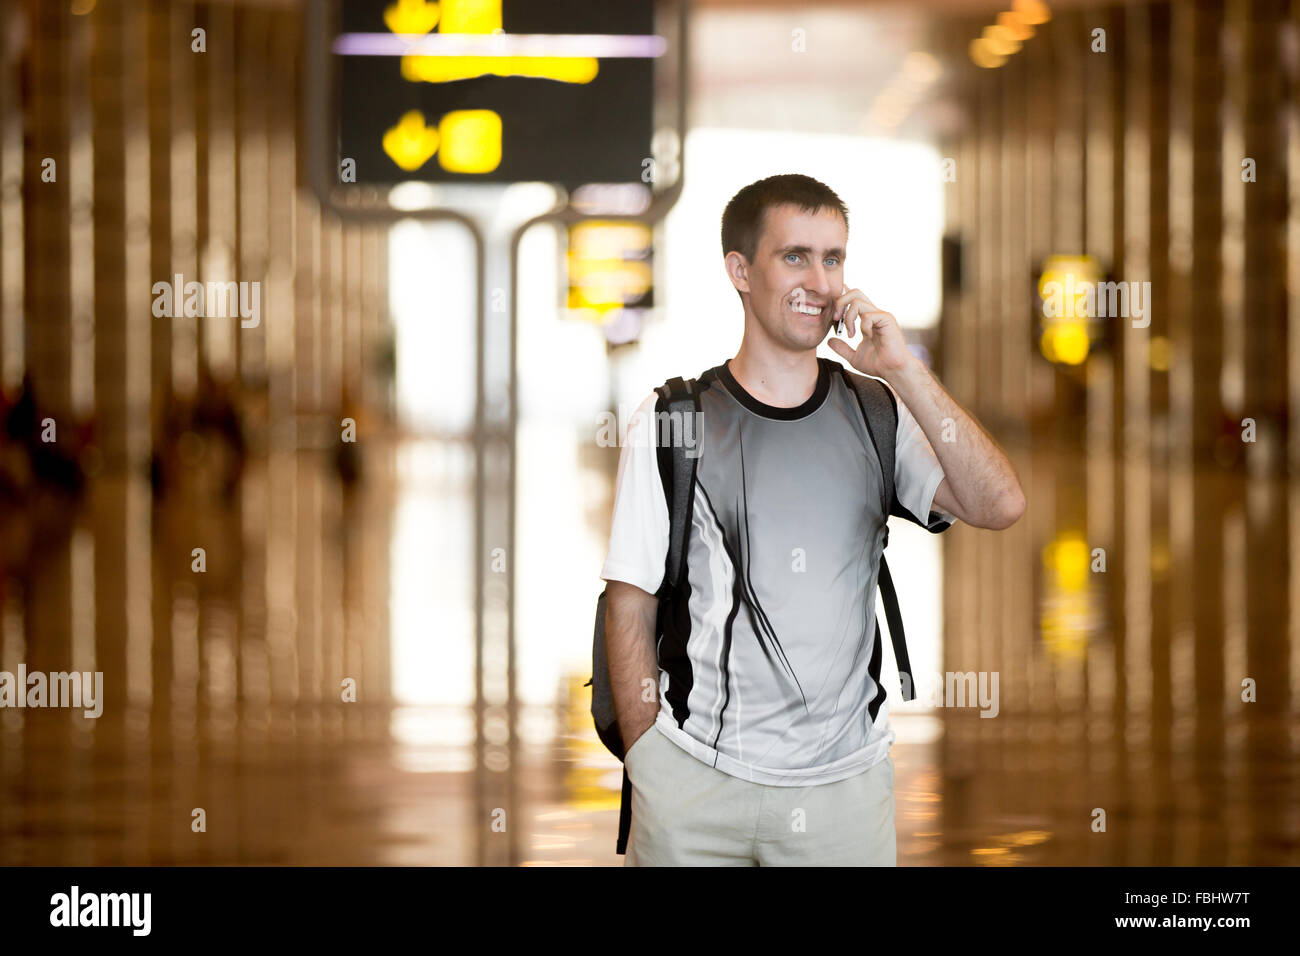 Full length portrait of cheerful, smiling young man with backpack walking in modern airport terminal building, holding cellphone Stock Photo